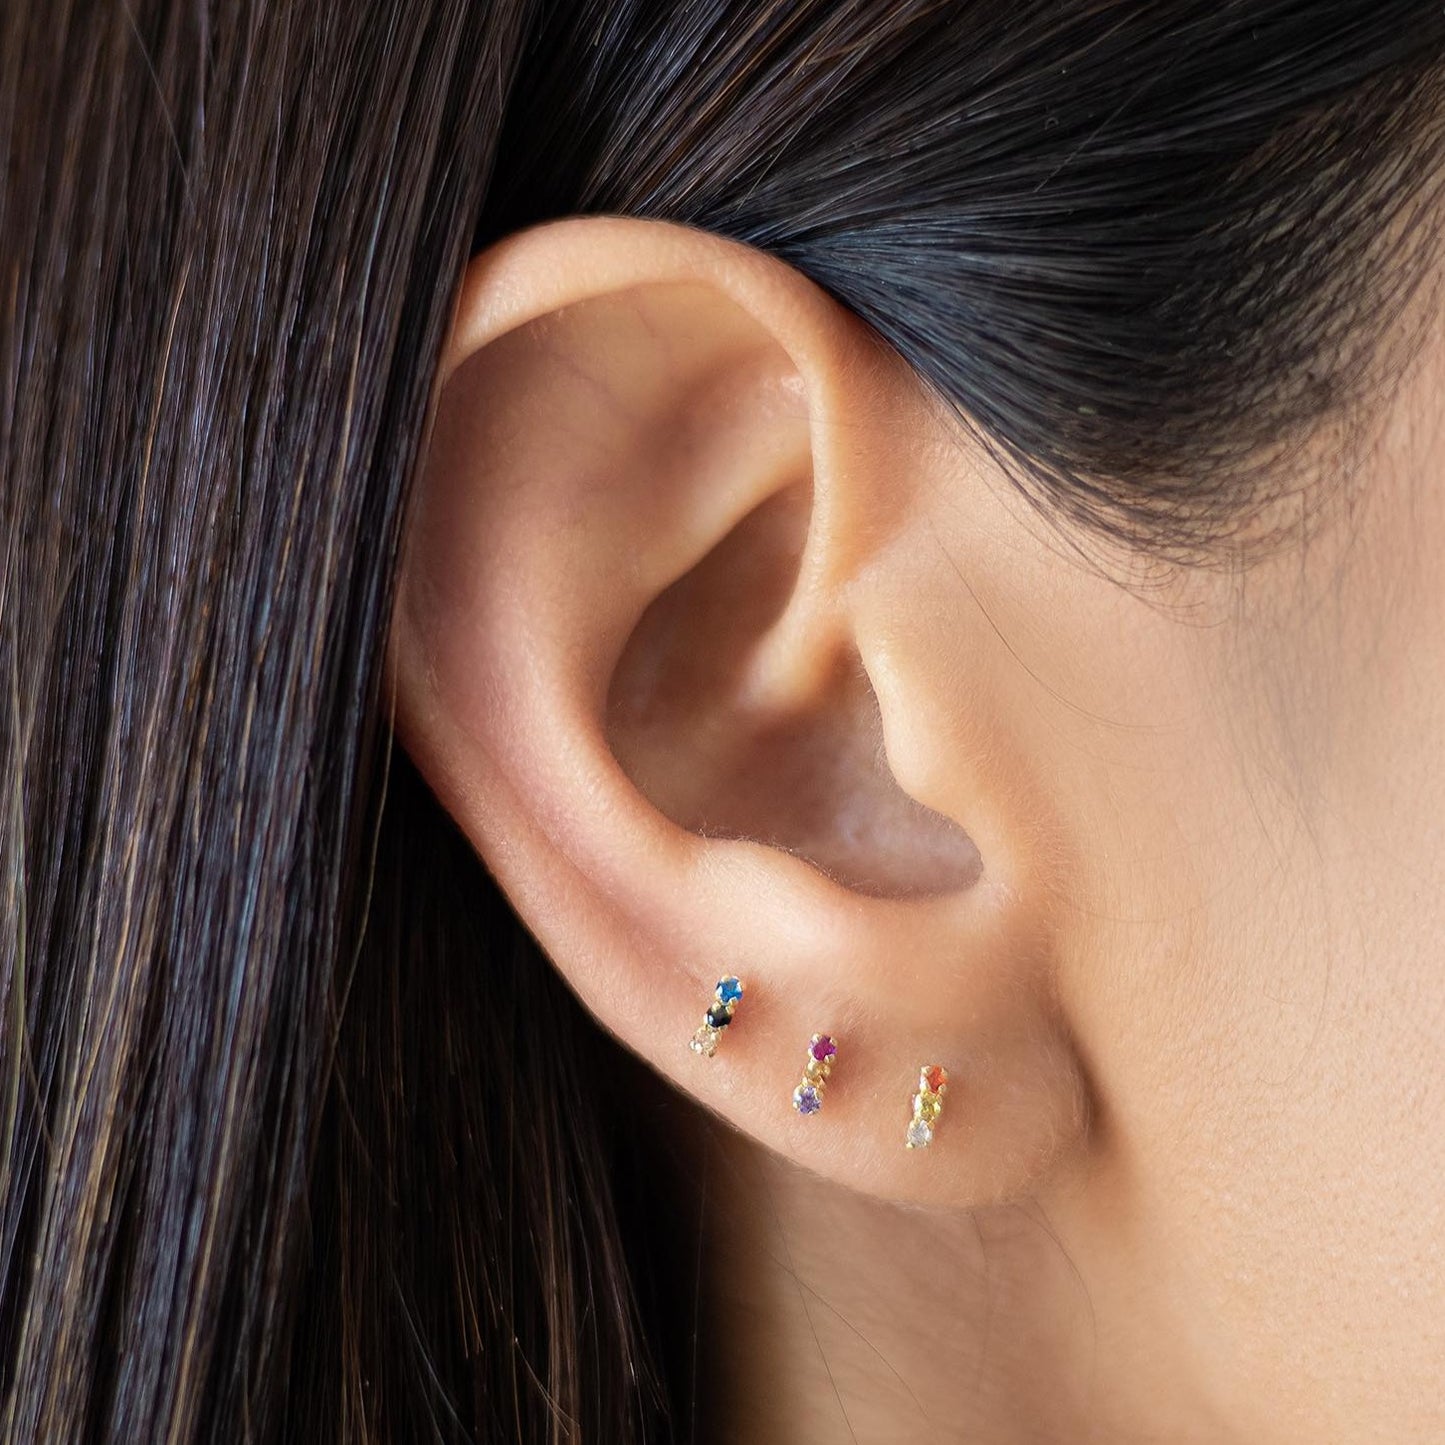 These beautiful 10K gold line earrings are perfect for everyday wear and make the perfect gift for any occasion. These earrings are lightweight, wrap around your earlobe perfectly and remain comfortable all day.